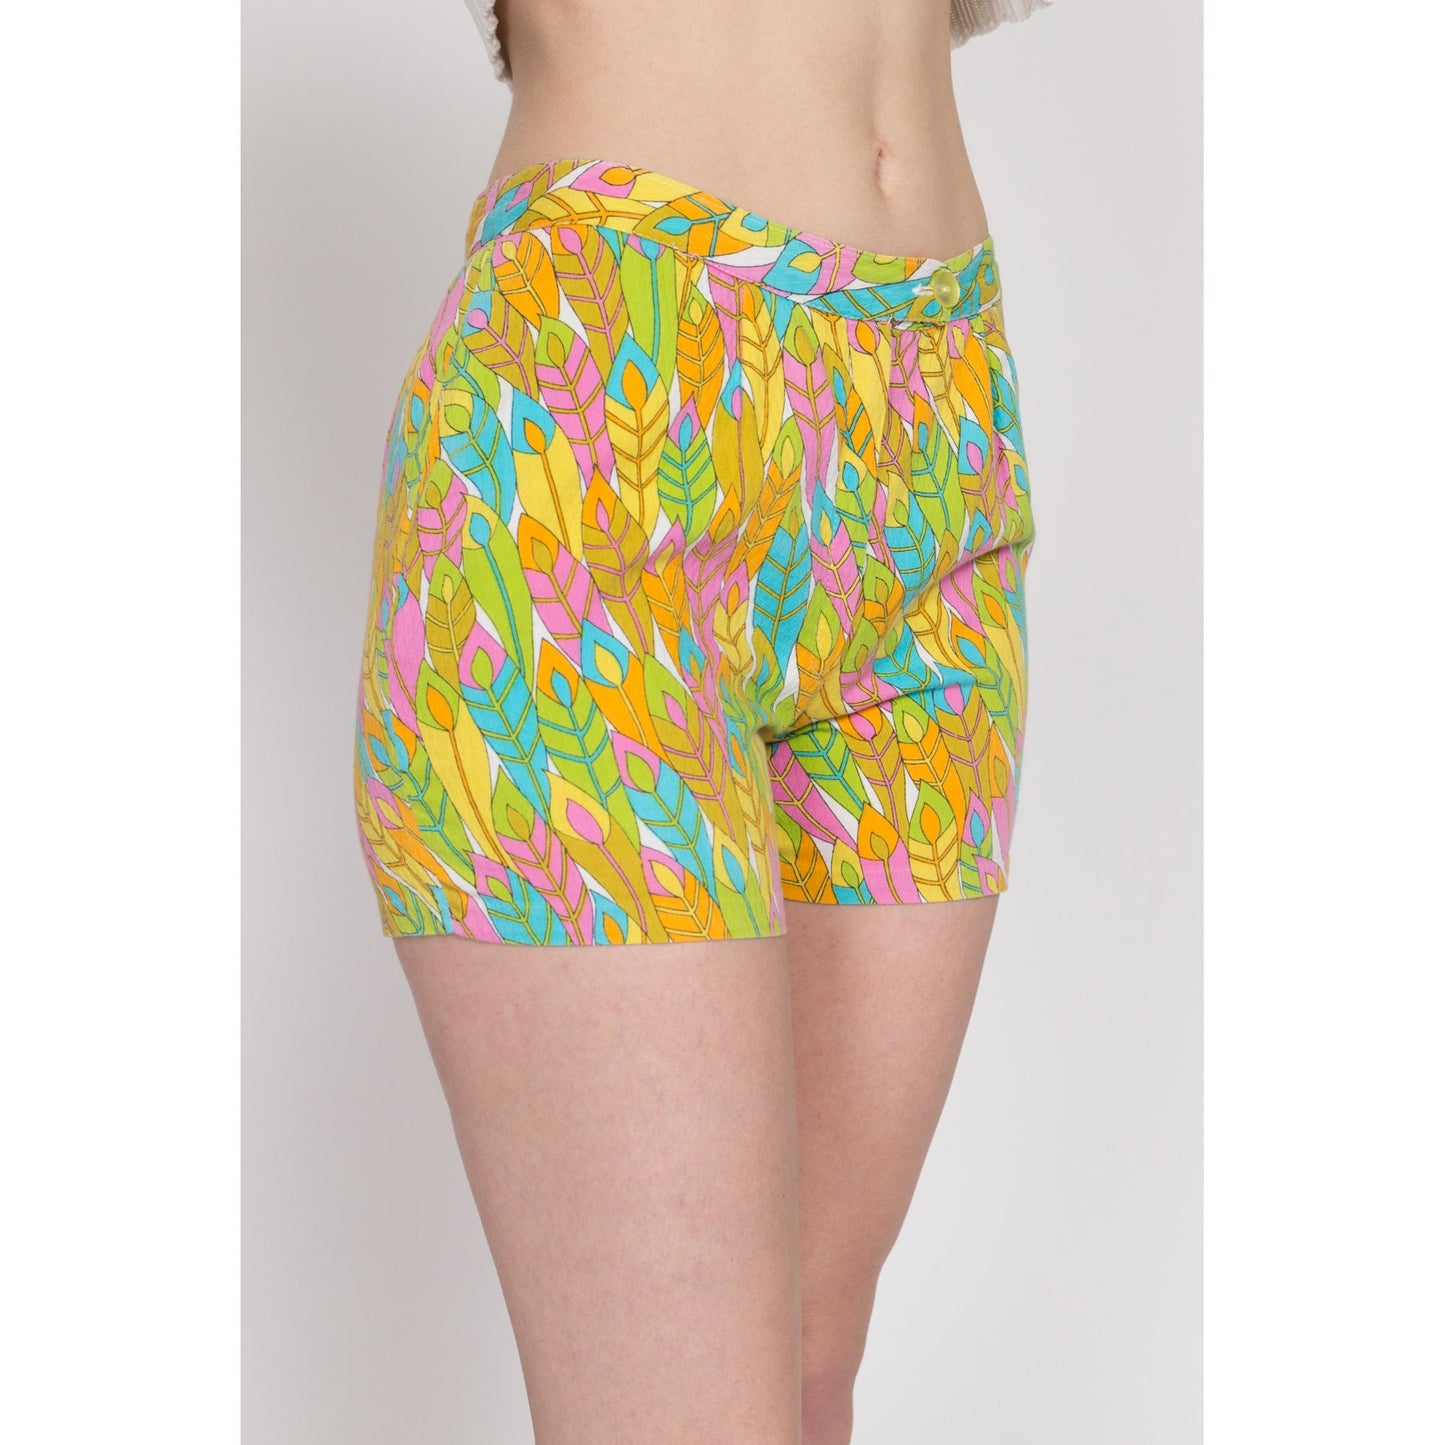 XS 70s Boho Psychedelic Leaf Print Shorts | Vintage Colorful Mid Rise Fitted Booty Shorts